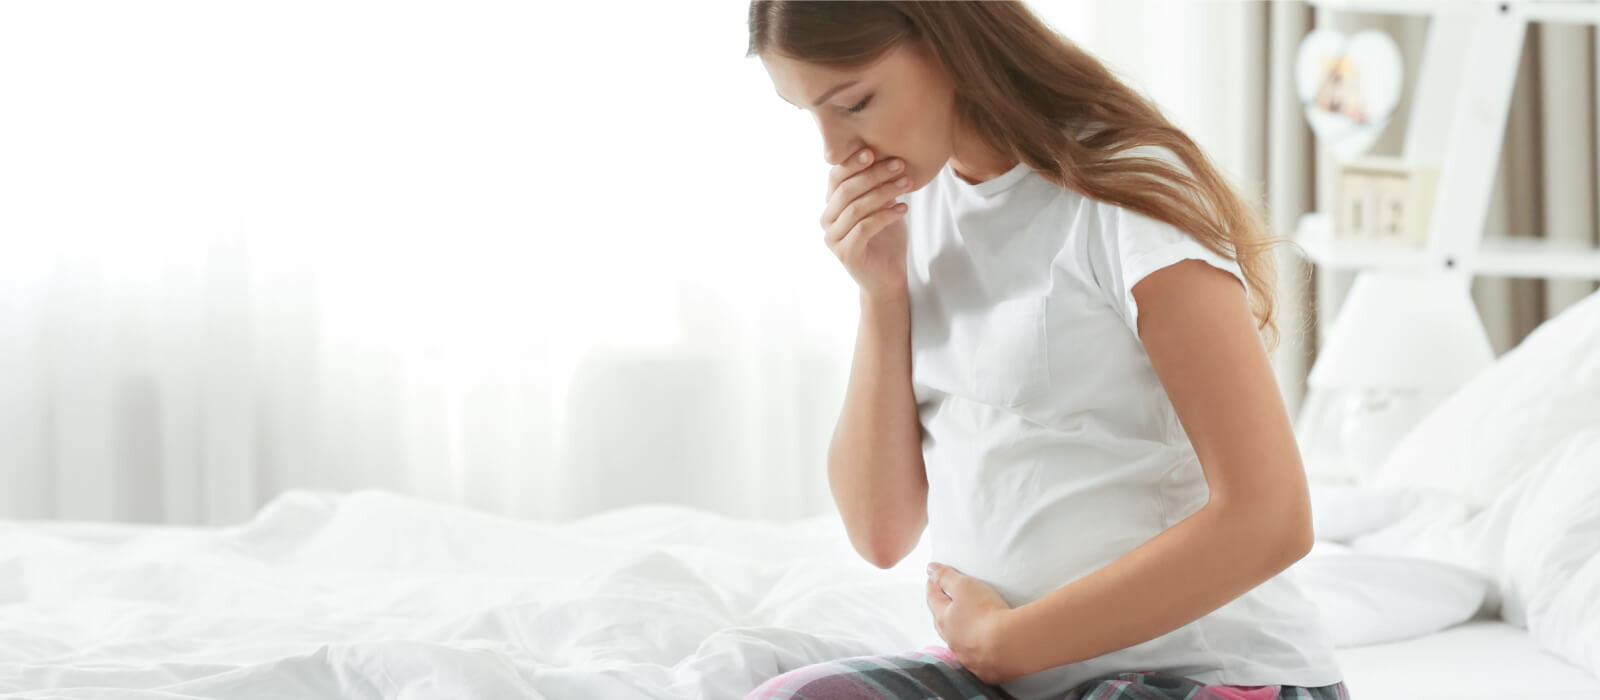 Sickness and Nausea during pregnancy